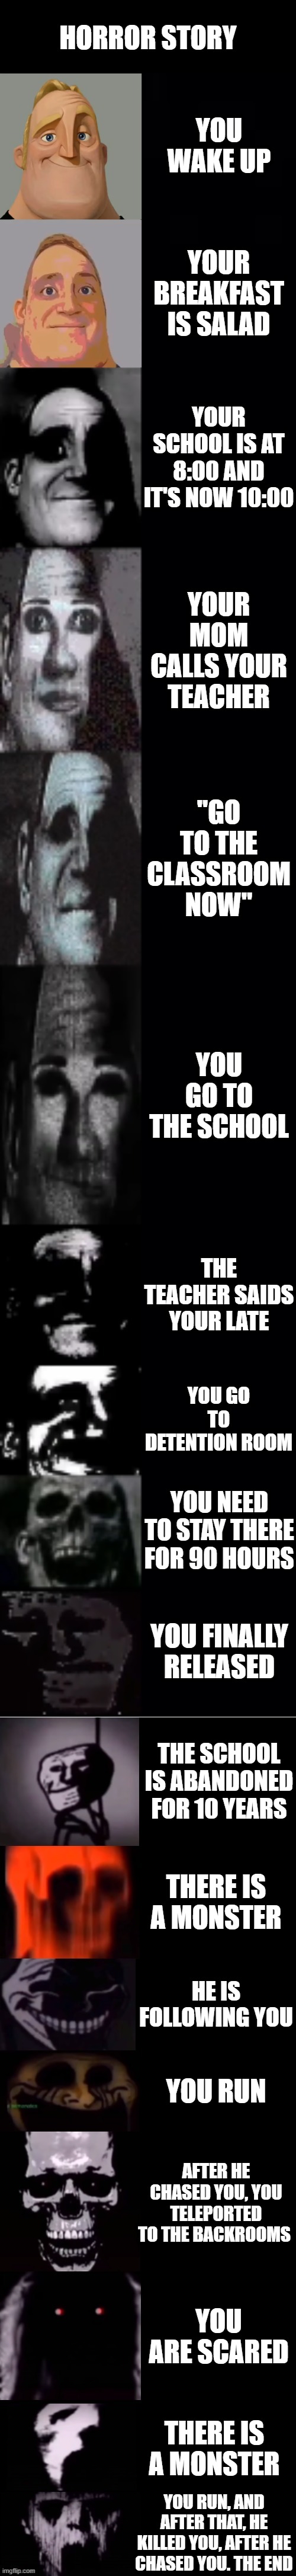 Horror Story | HORROR STORY; YOU WAKE UP; YOUR BREAKFAST IS SALAD; YOUR SCHOOL IS AT 8:00 AND IT'S NOW 10:00; YOUR MOM CALLS YOUR TEACHER; "GO TO THE CLASSROOM NOW"; YOU GO TO THE SCHOOL; THE TEACHER SAIDS YOUR LATE; YOU GO TO DETENTION ROOM; YOU NEED TO STAY THERE FOR 90 HOURS; YOU FINALLY RELEASED; THE SCHOOL IS ABANDONED FOR 10 YEARS; THERE IS A MONSTER; HE IS FOLLOWING YOU; YOU RUN; AFTER HE CHASED YOU, YOU TELEPORTED TO THE BACKROOMS; YOU ARE SCARED; THERE IS A MONSTER; YOU RUN, AND AFTER THAT, HE KILLED YOU, AFTER HE CHASED YOU. THE END | image tagged in mr incredible becoming uncanny 1st extension | made w/ Imgflip meme maker